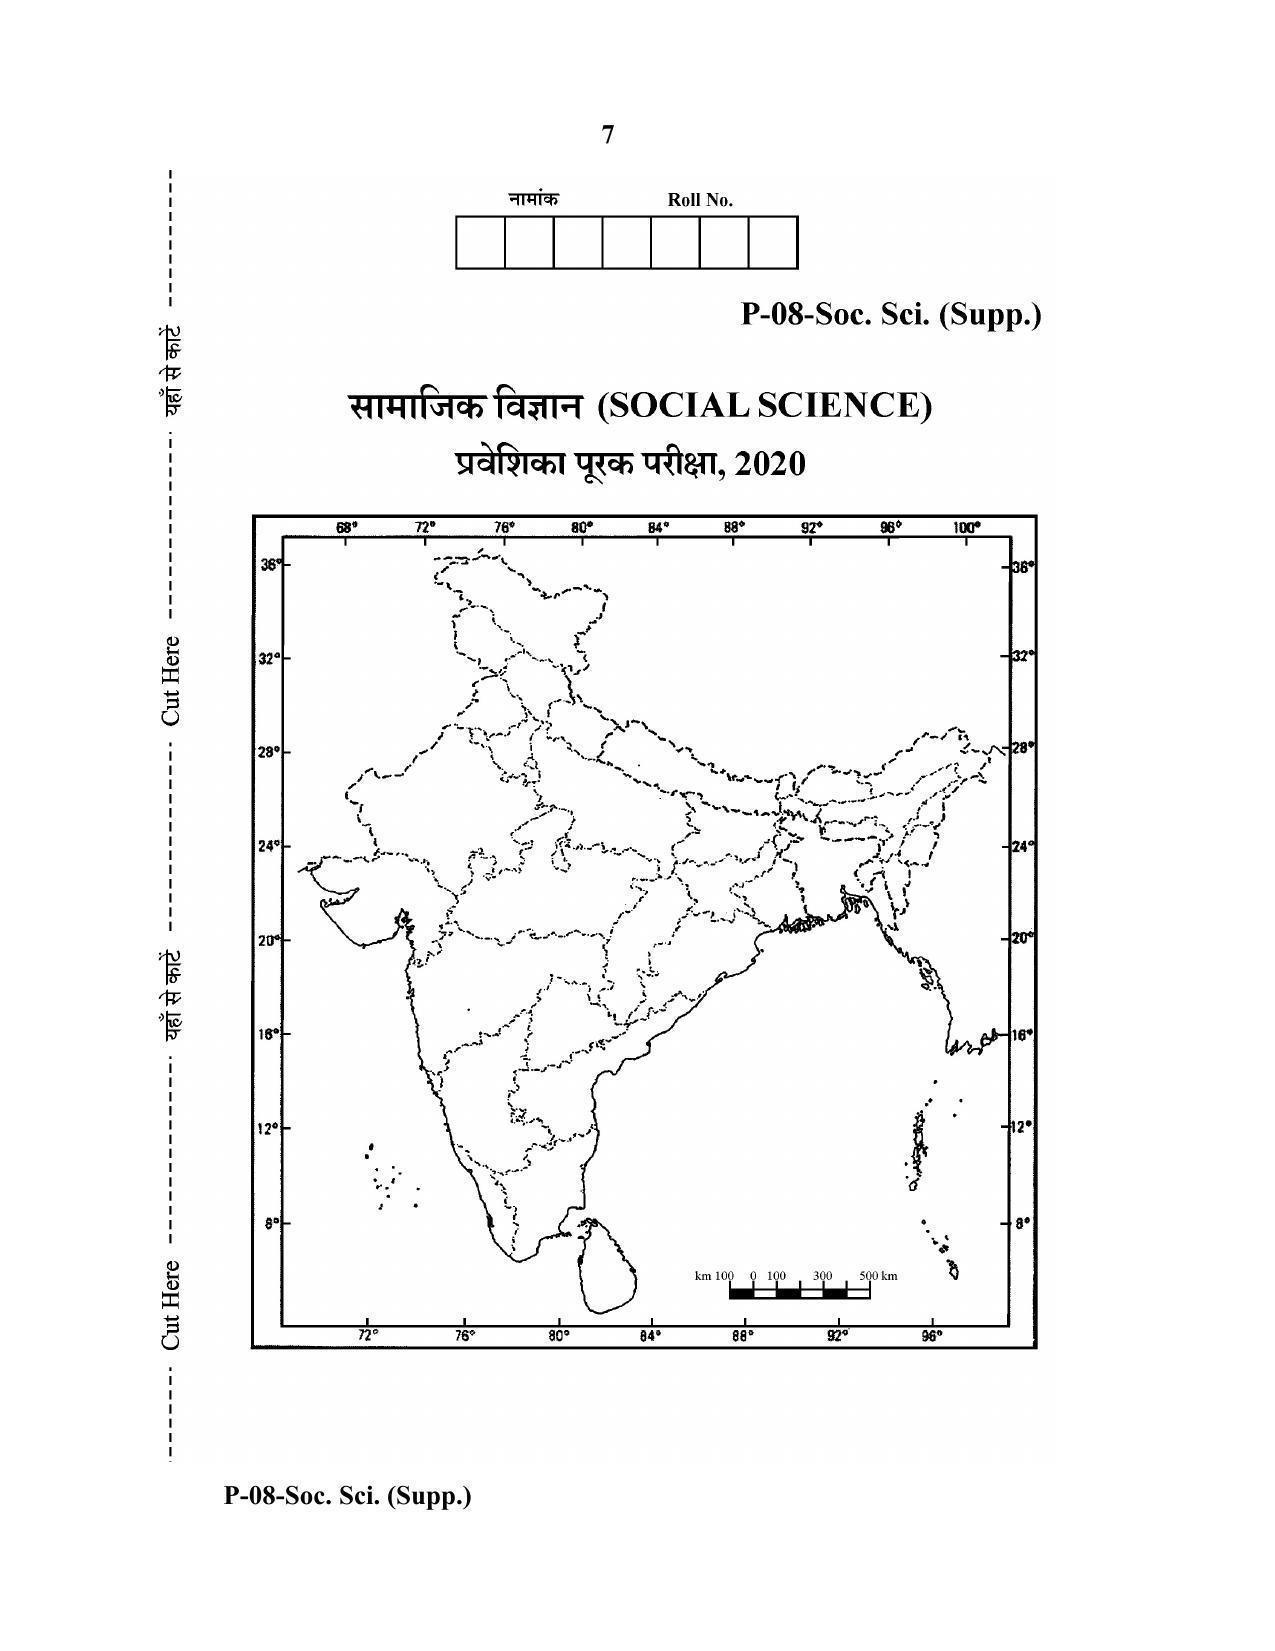 RBSE 2020 Social Science  (SUPPLEMENTARY) Praveshika Question Paper - Page 7